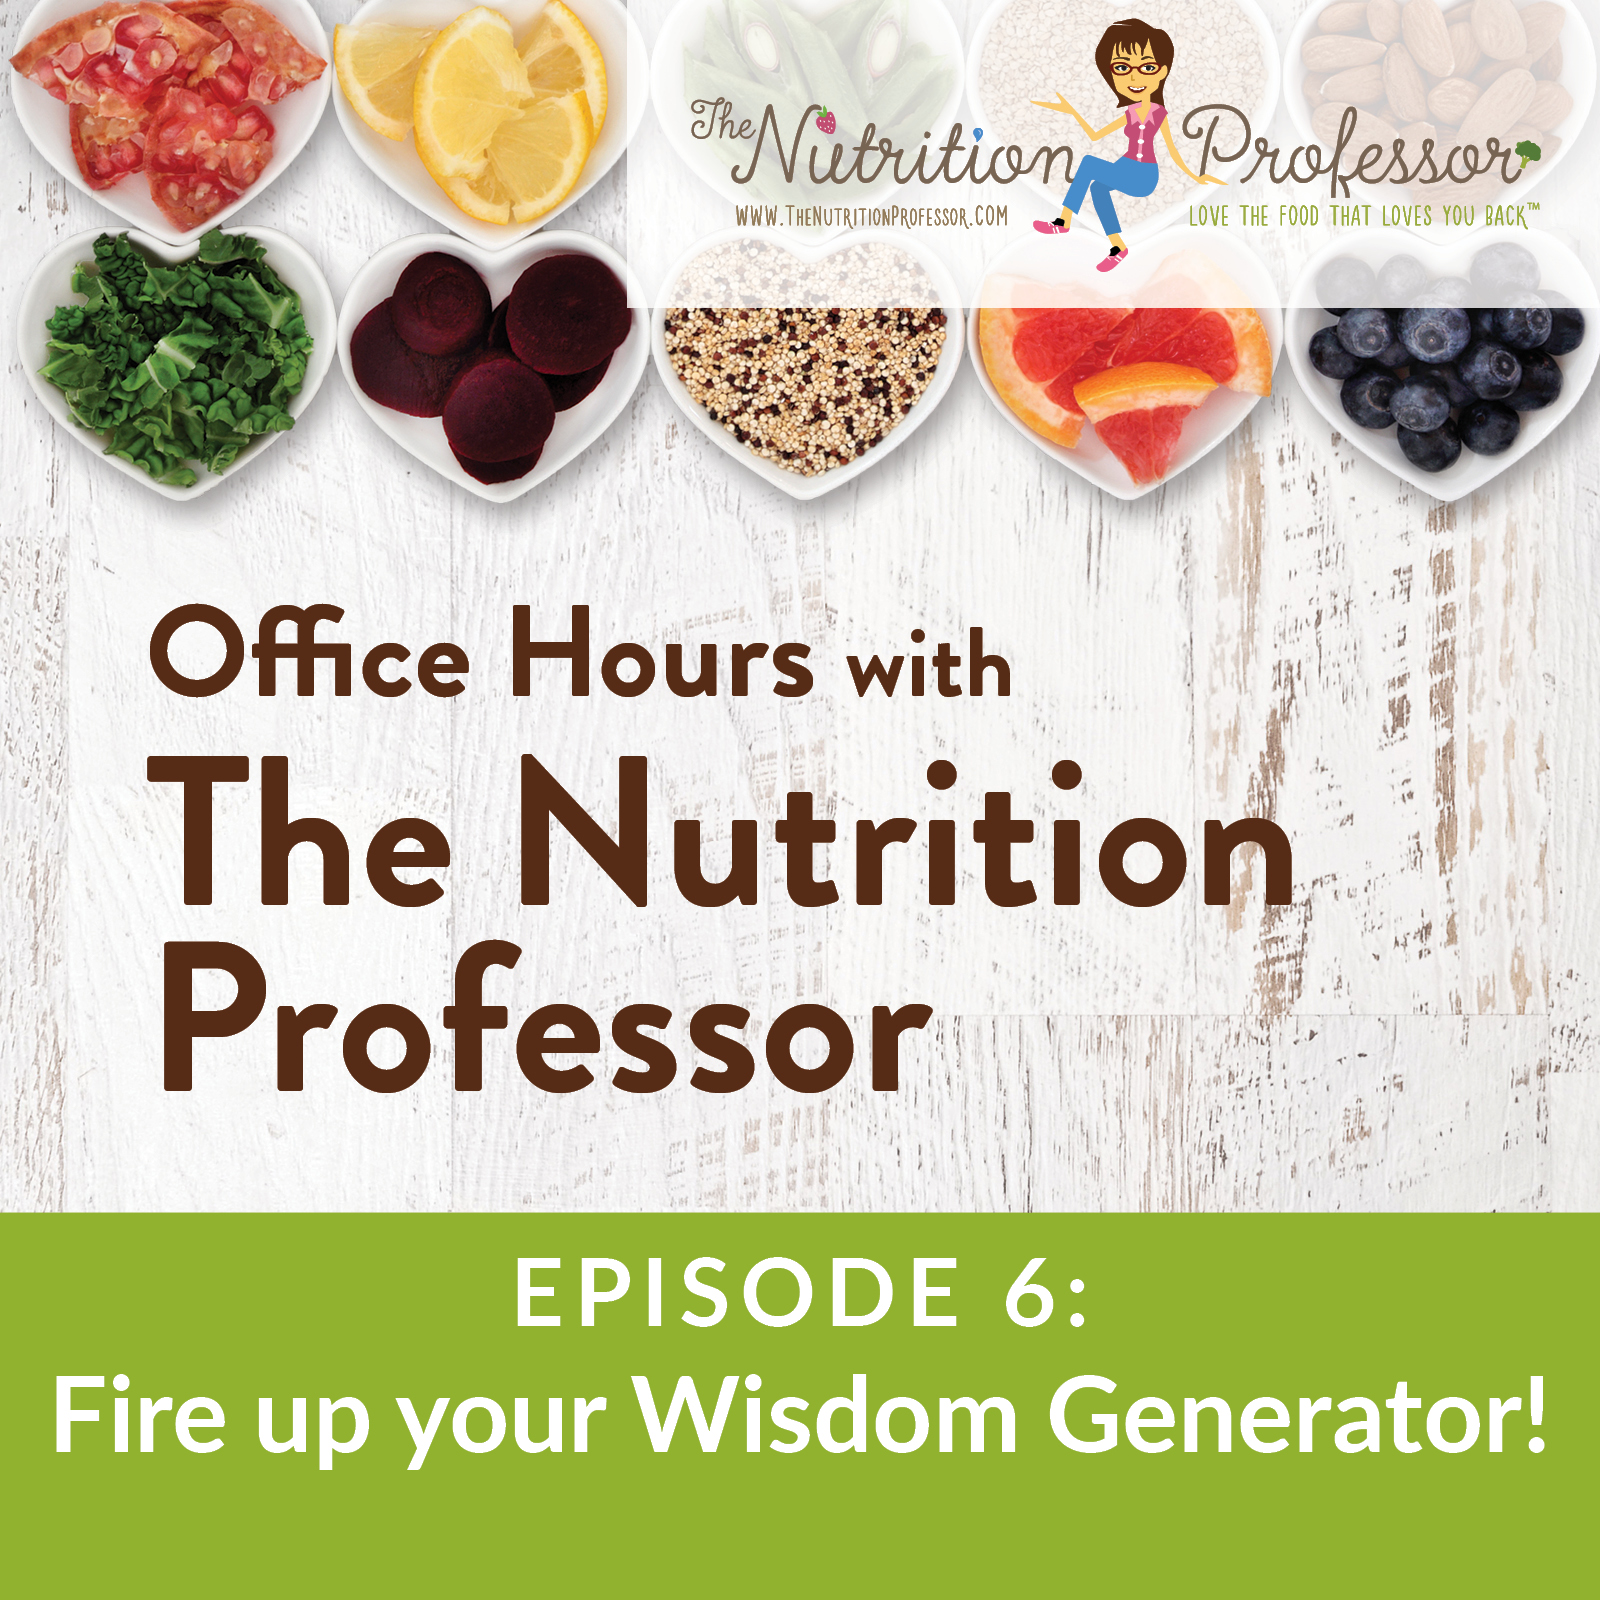 Podcast Episode 6: Fire up your Wisdom Generator!